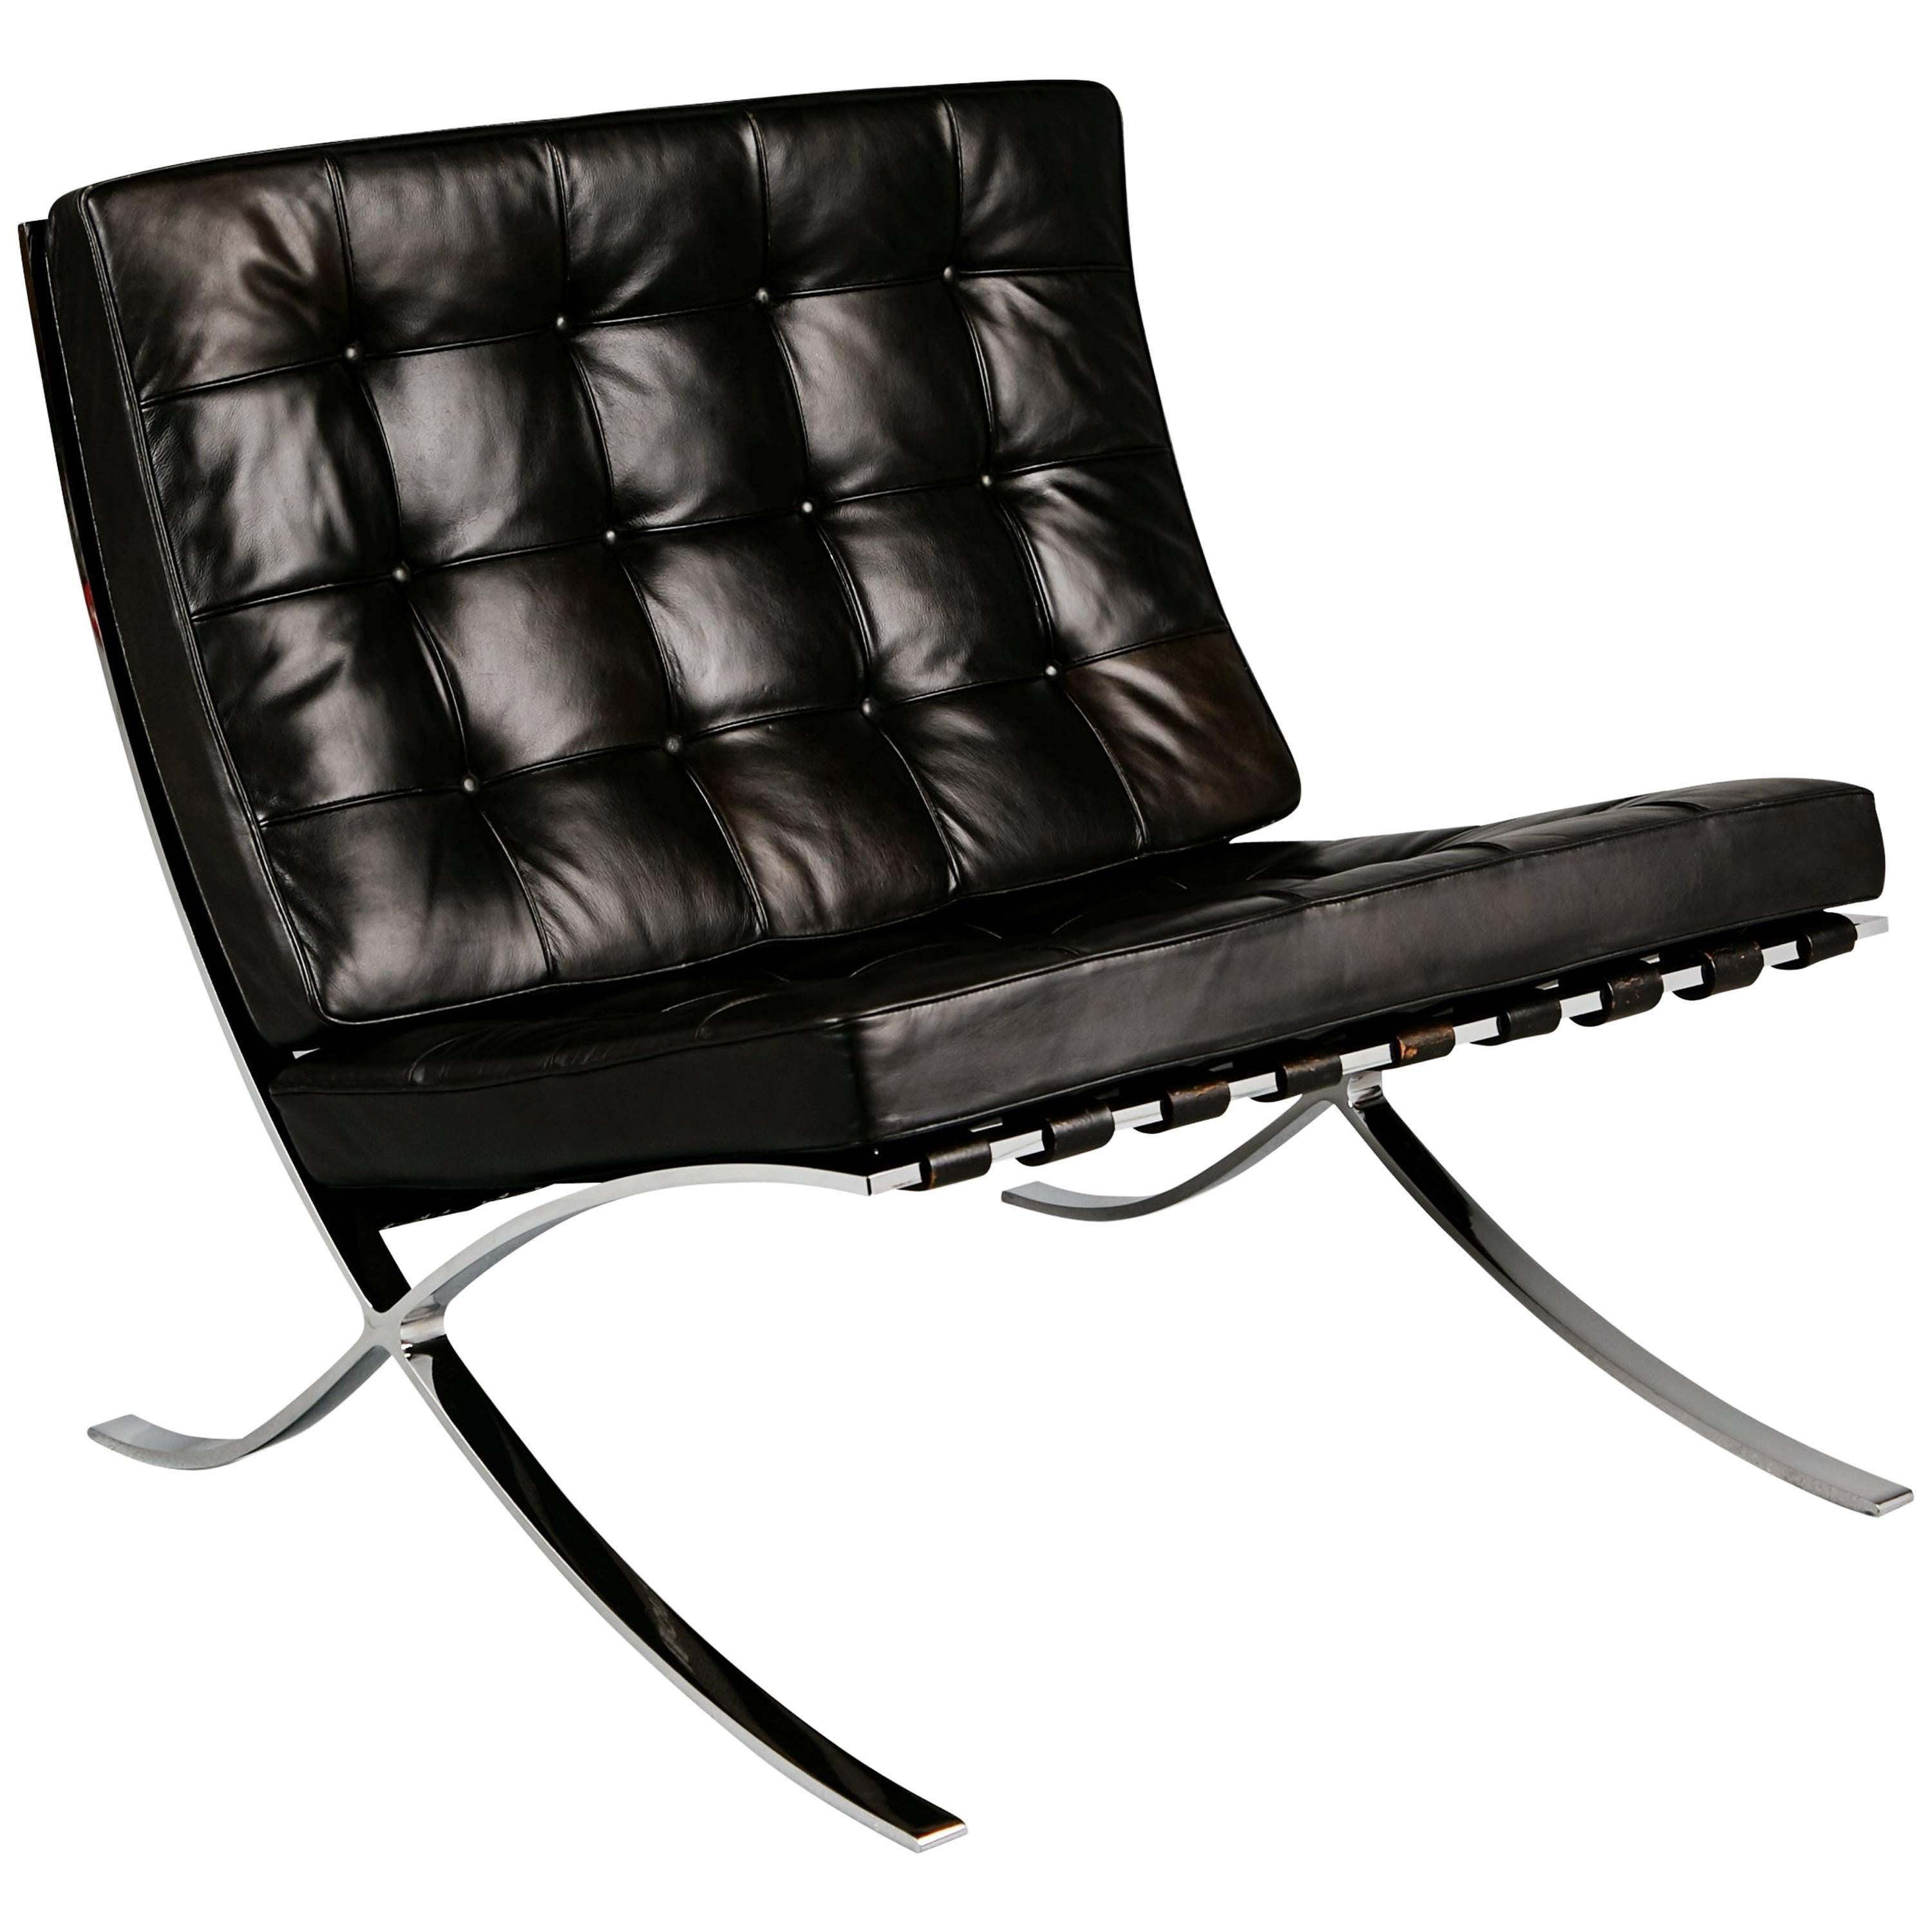 Signed Knoll Black Leather Barcelona Lounge Chair by Ludwig Mies van der Rohe